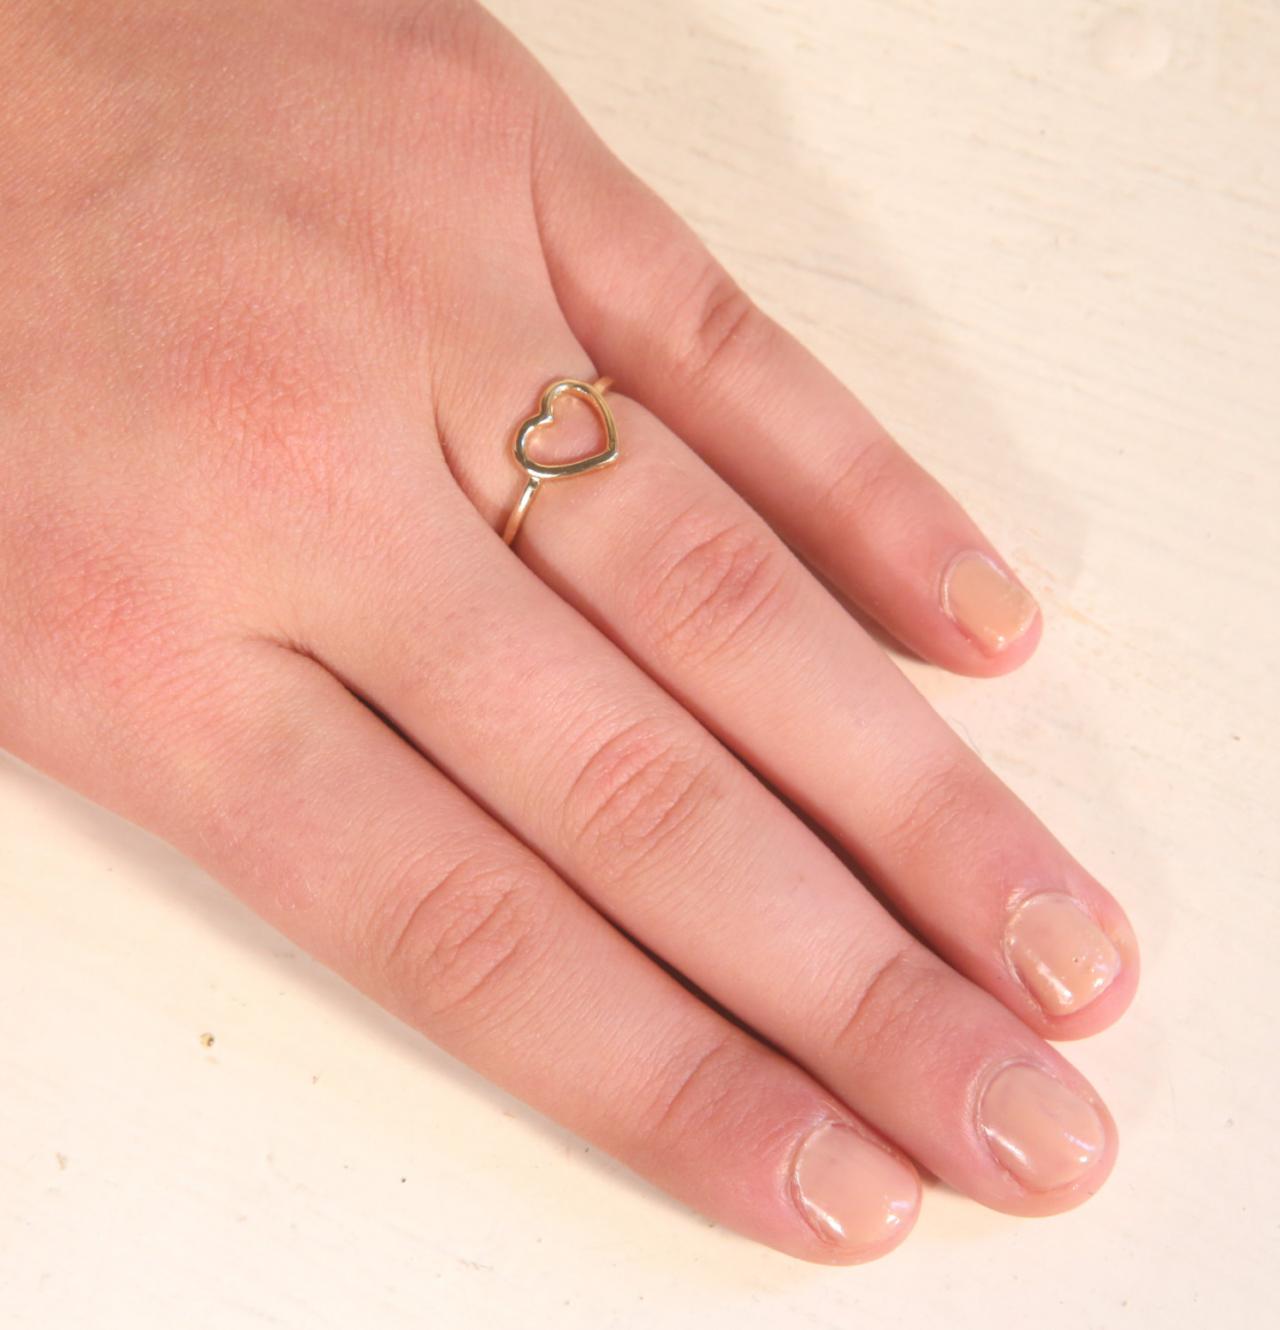 Gold Ring, Gold Filled Ring, Heart Ring, Knuckle Ring, Gold Ring, Love Ring, Small Gold Ring, Bbf Ring - A 500